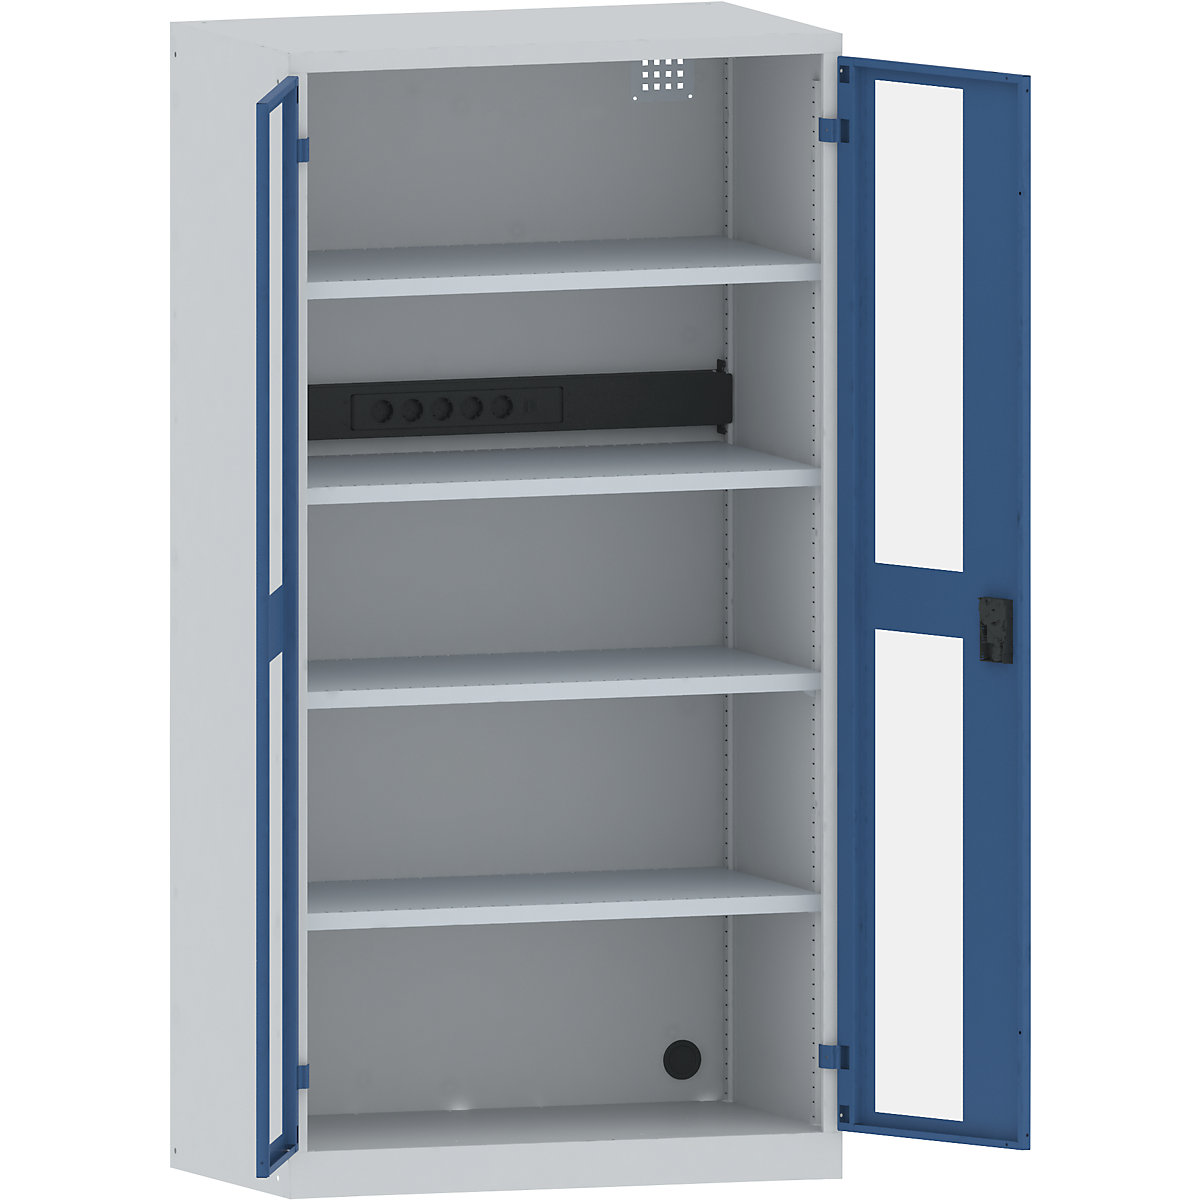 Battery charging cabinet – LISTA, 4 shelves, vision panel doors, power strip at rear, grey / blue-5